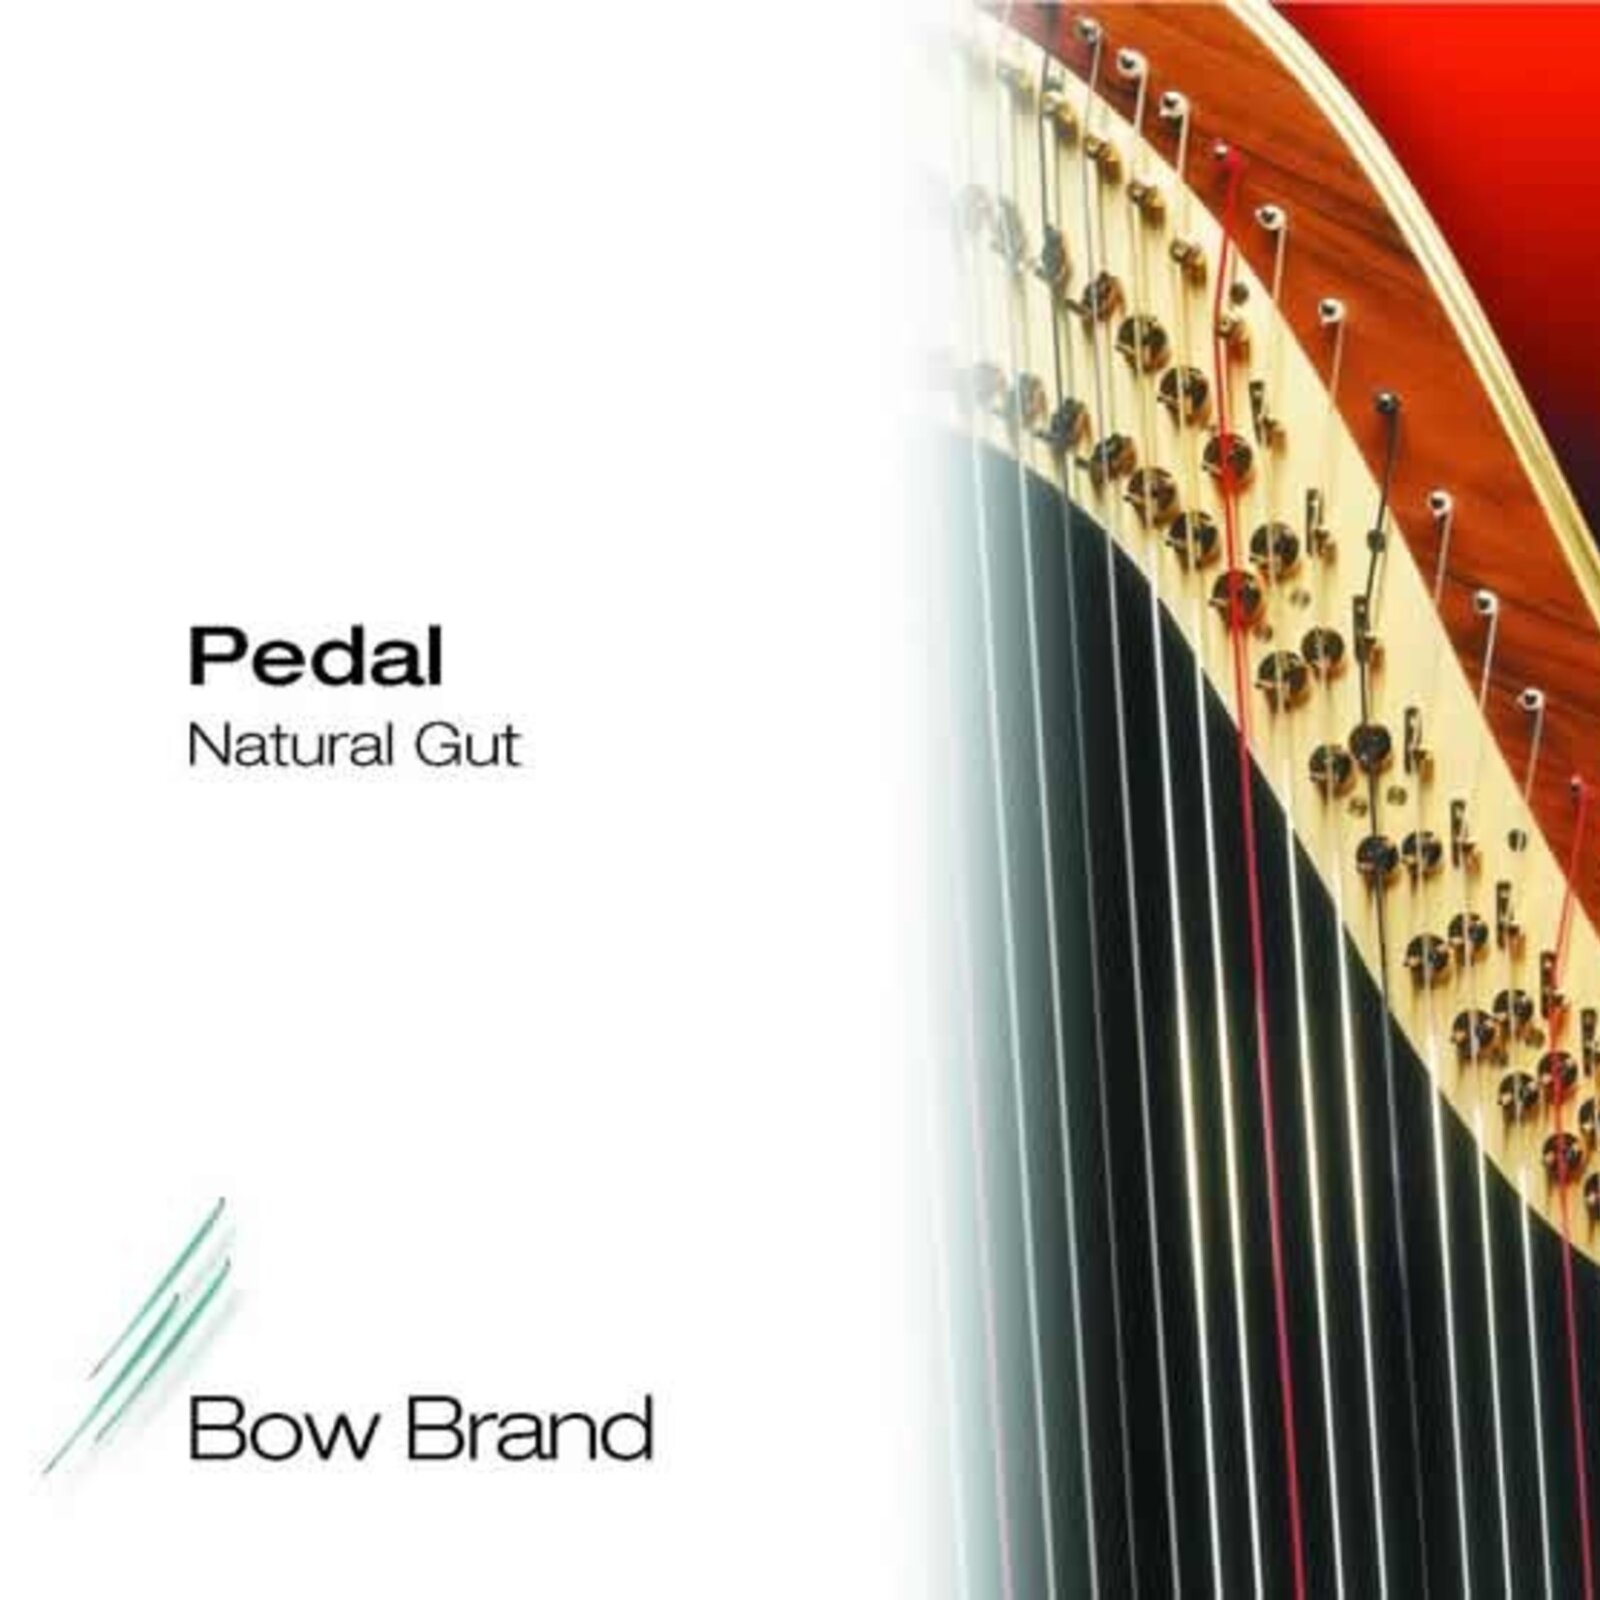 Bow Brand N 9 D 2nd octave in gut for pedal harp : photo 1